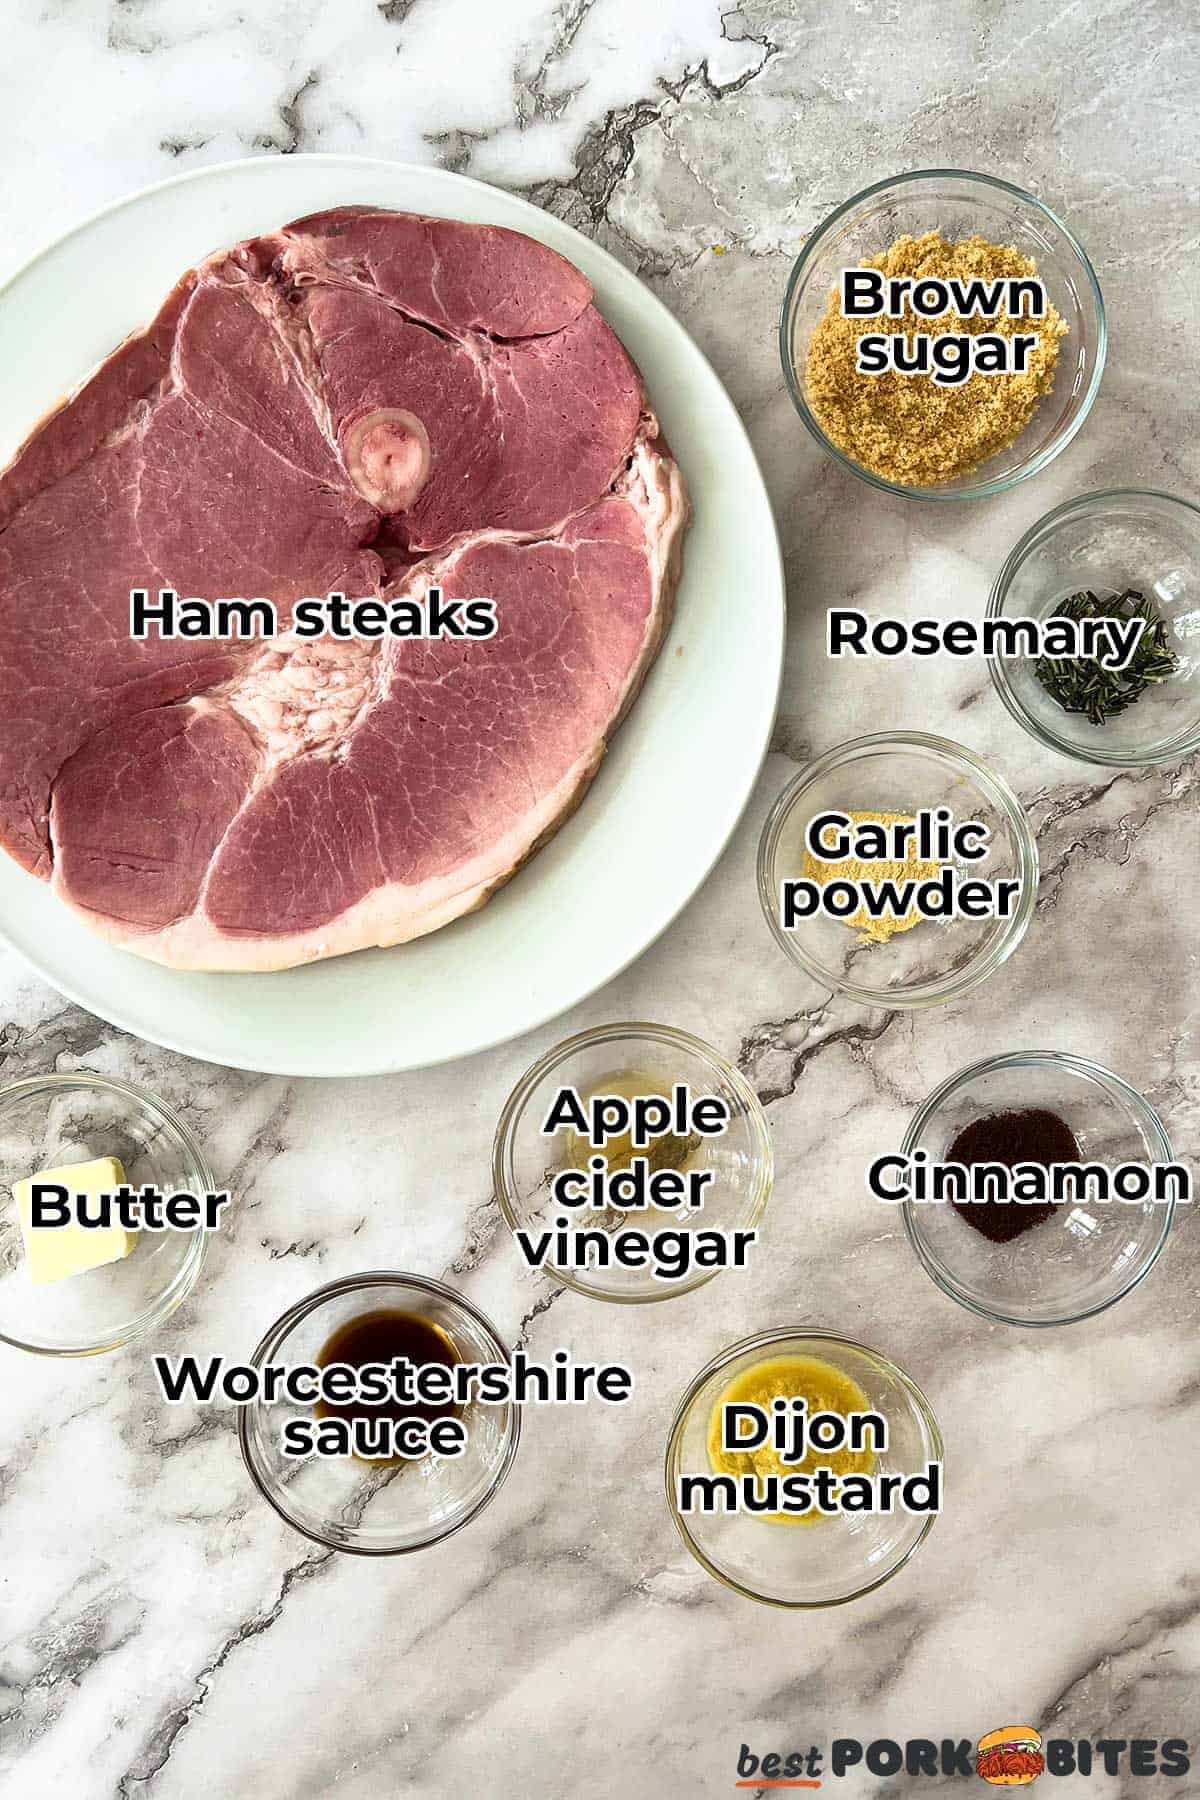 all the ingredients for ham steaks with labels